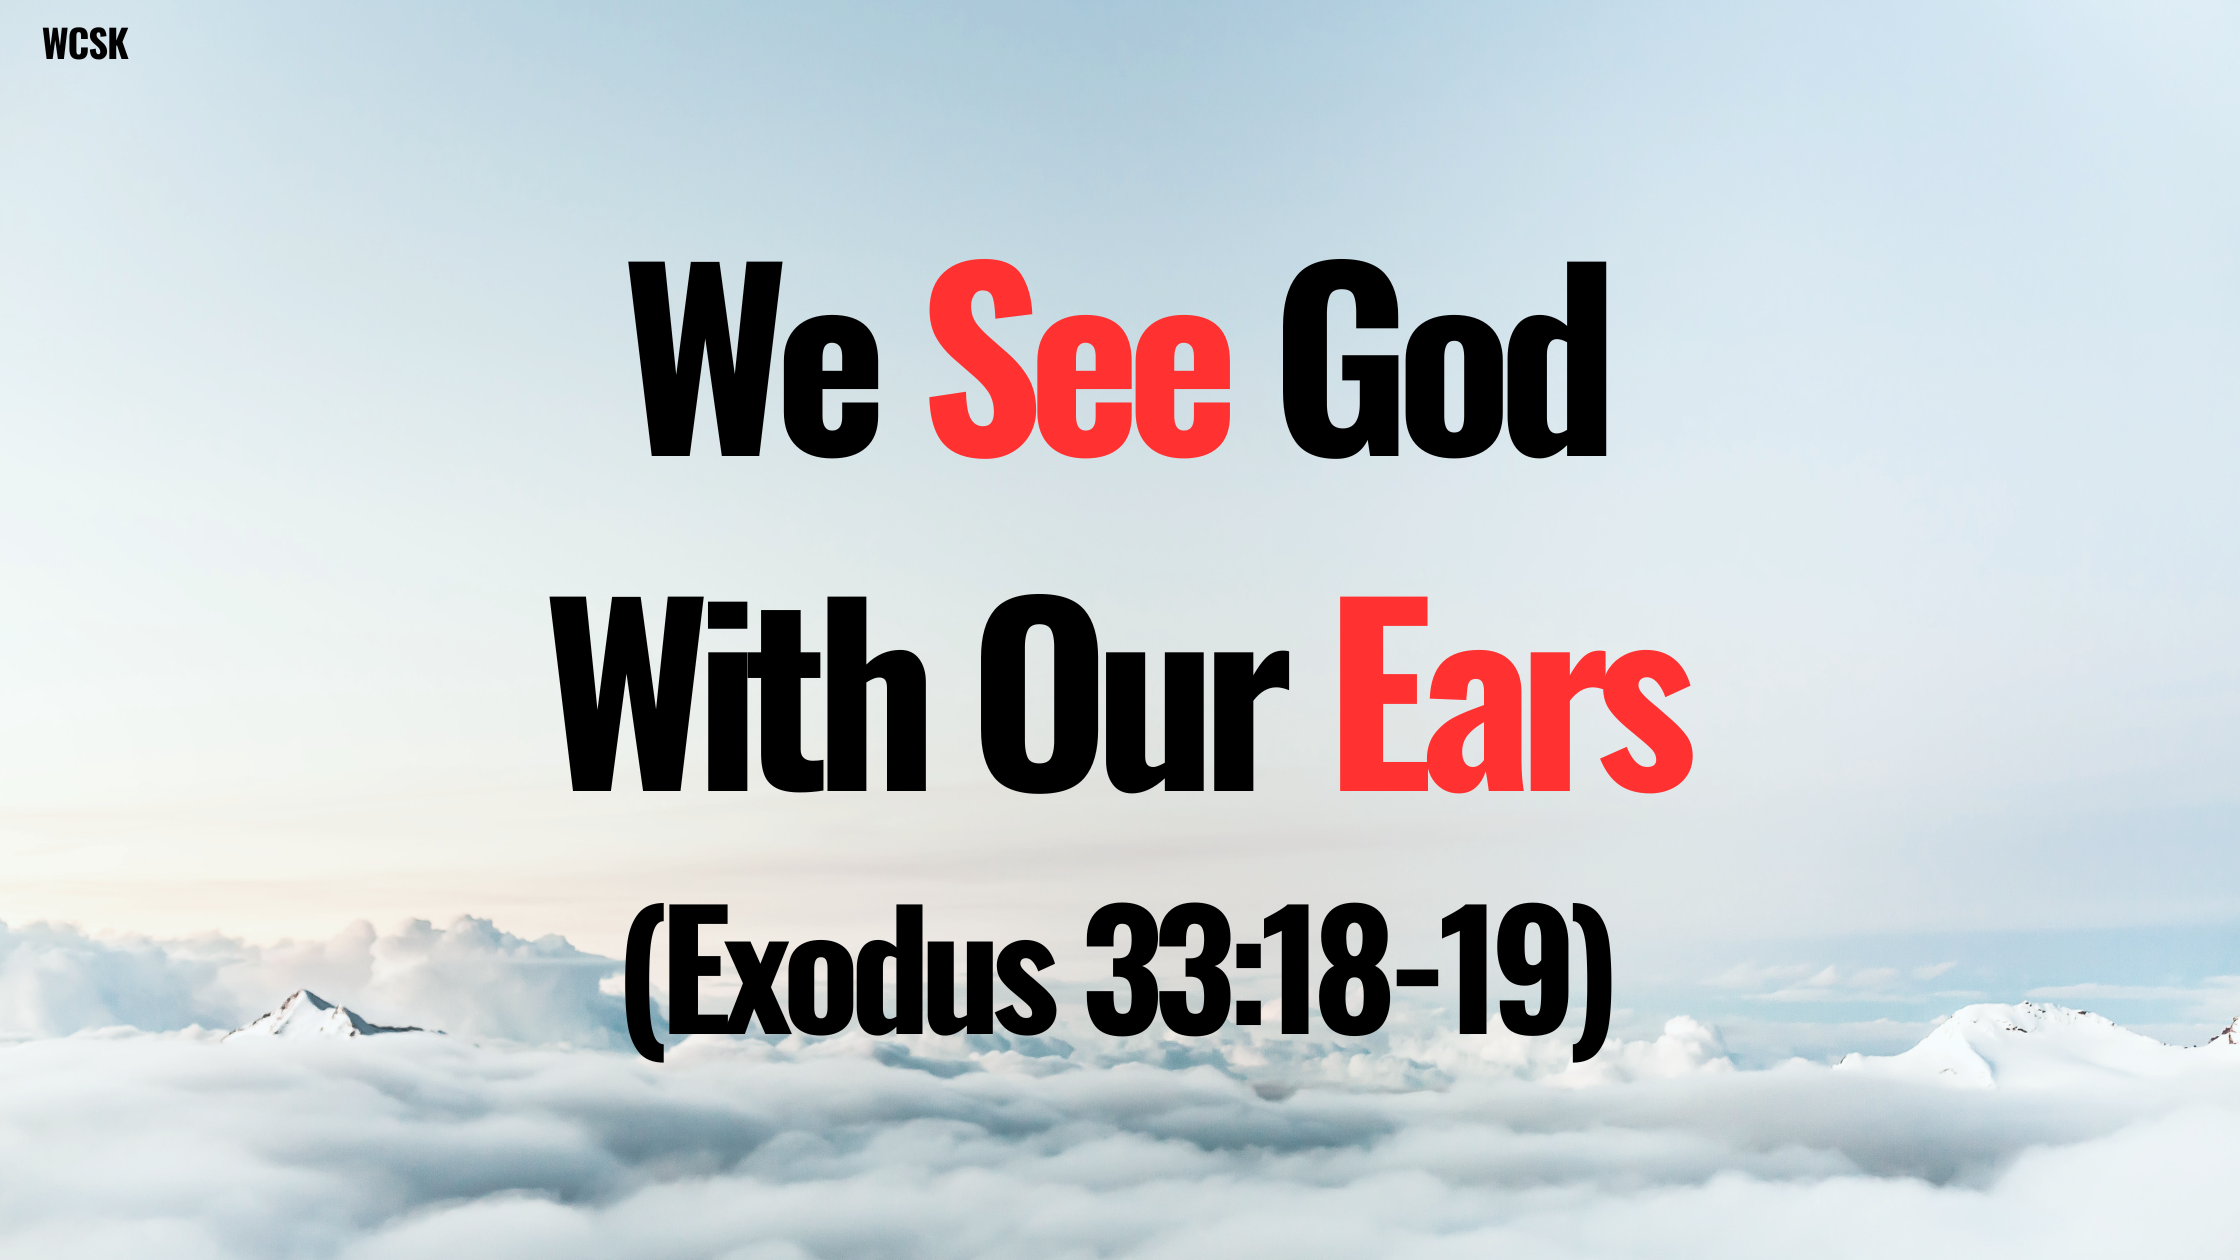 We See God With Our Ears (Exodus 33:18-19)